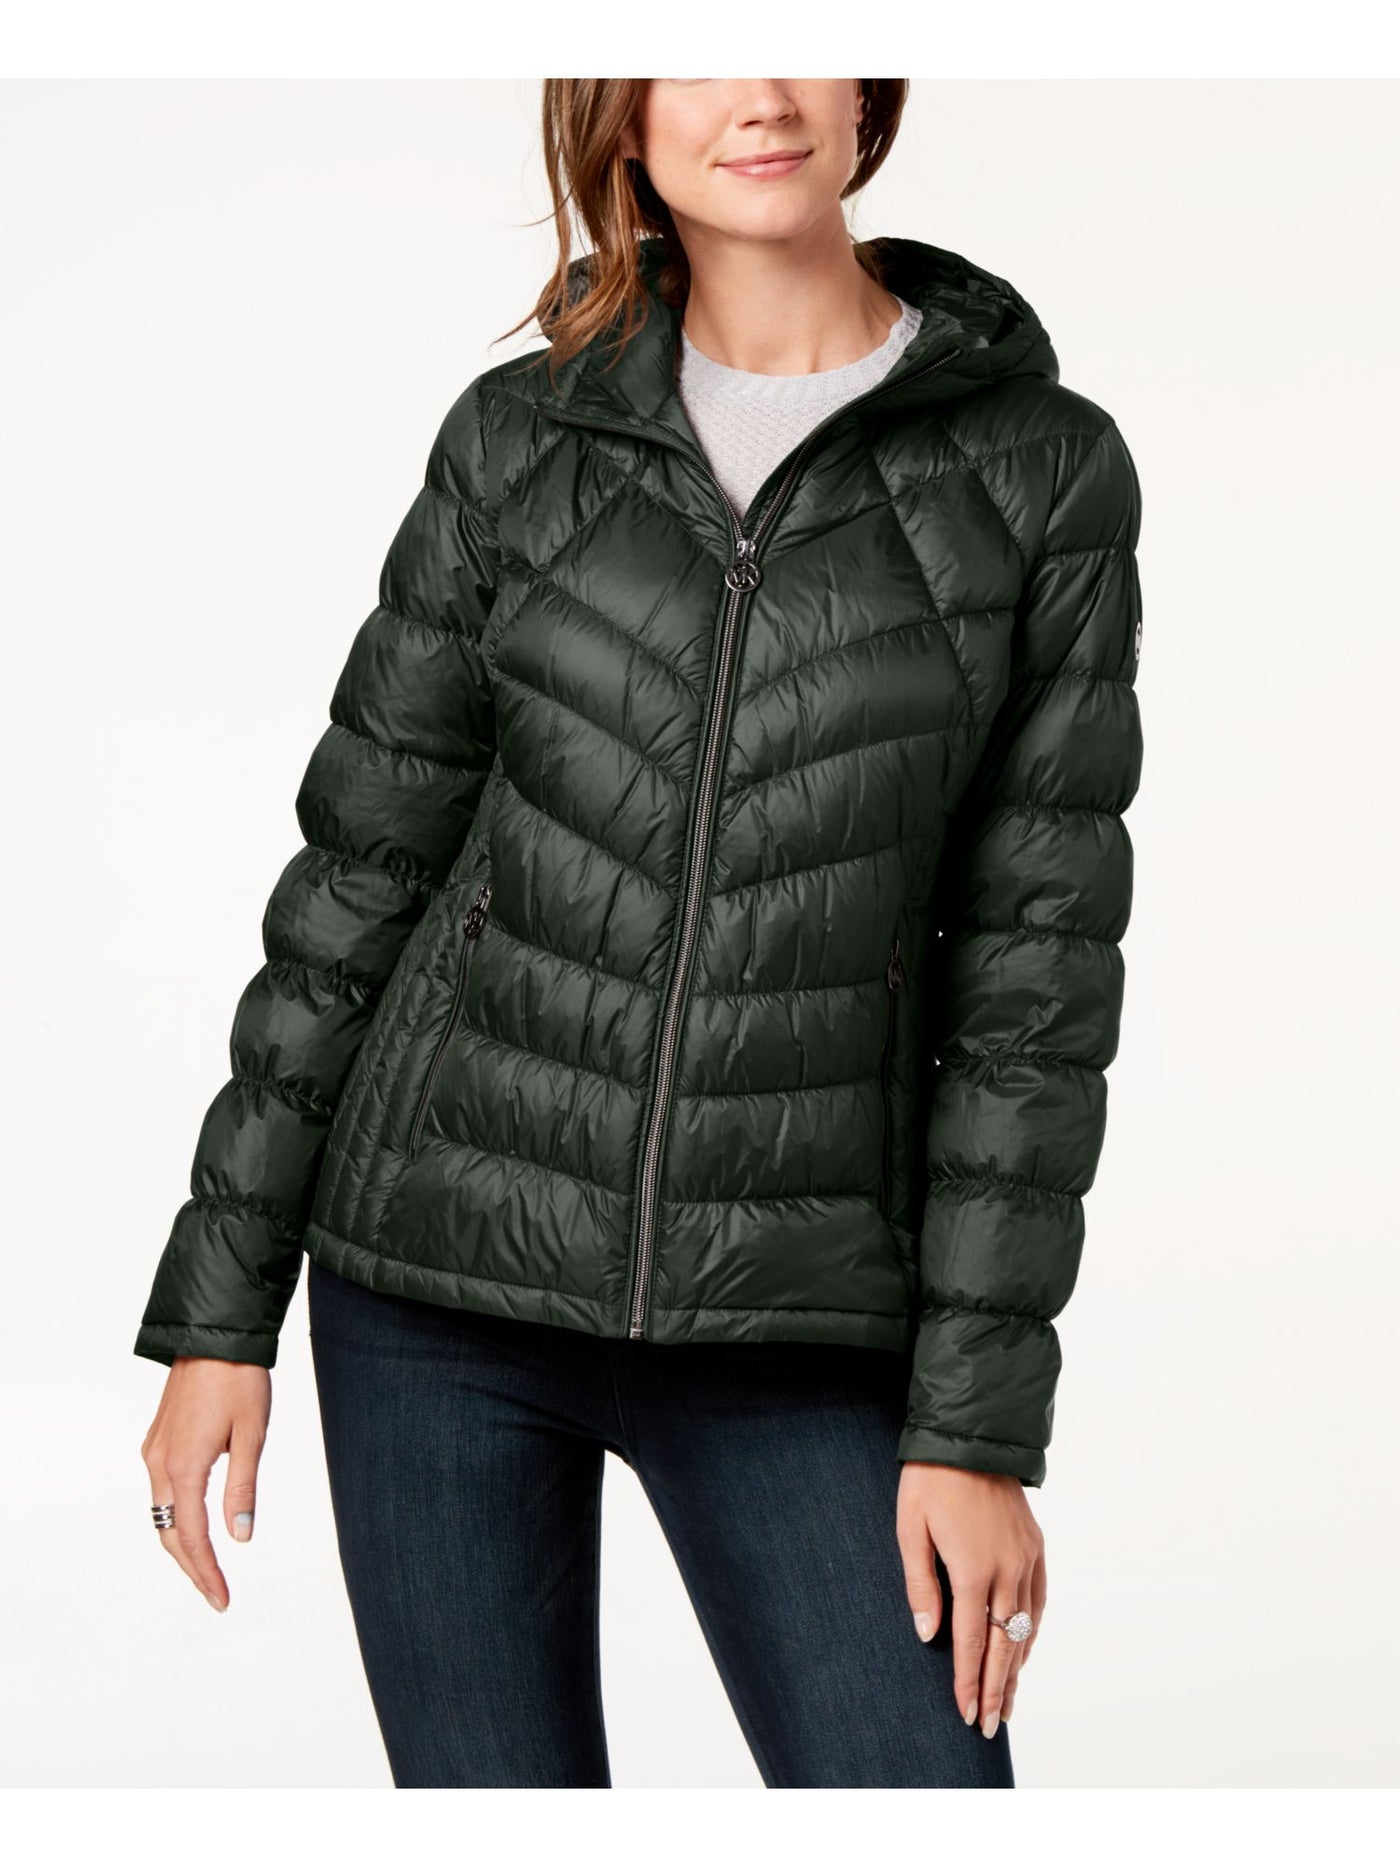 MICHAEL KORS Womens Black Zippered Pocketed Packable Down Puffer Hooded Winter Jacket Coat Petites PXS